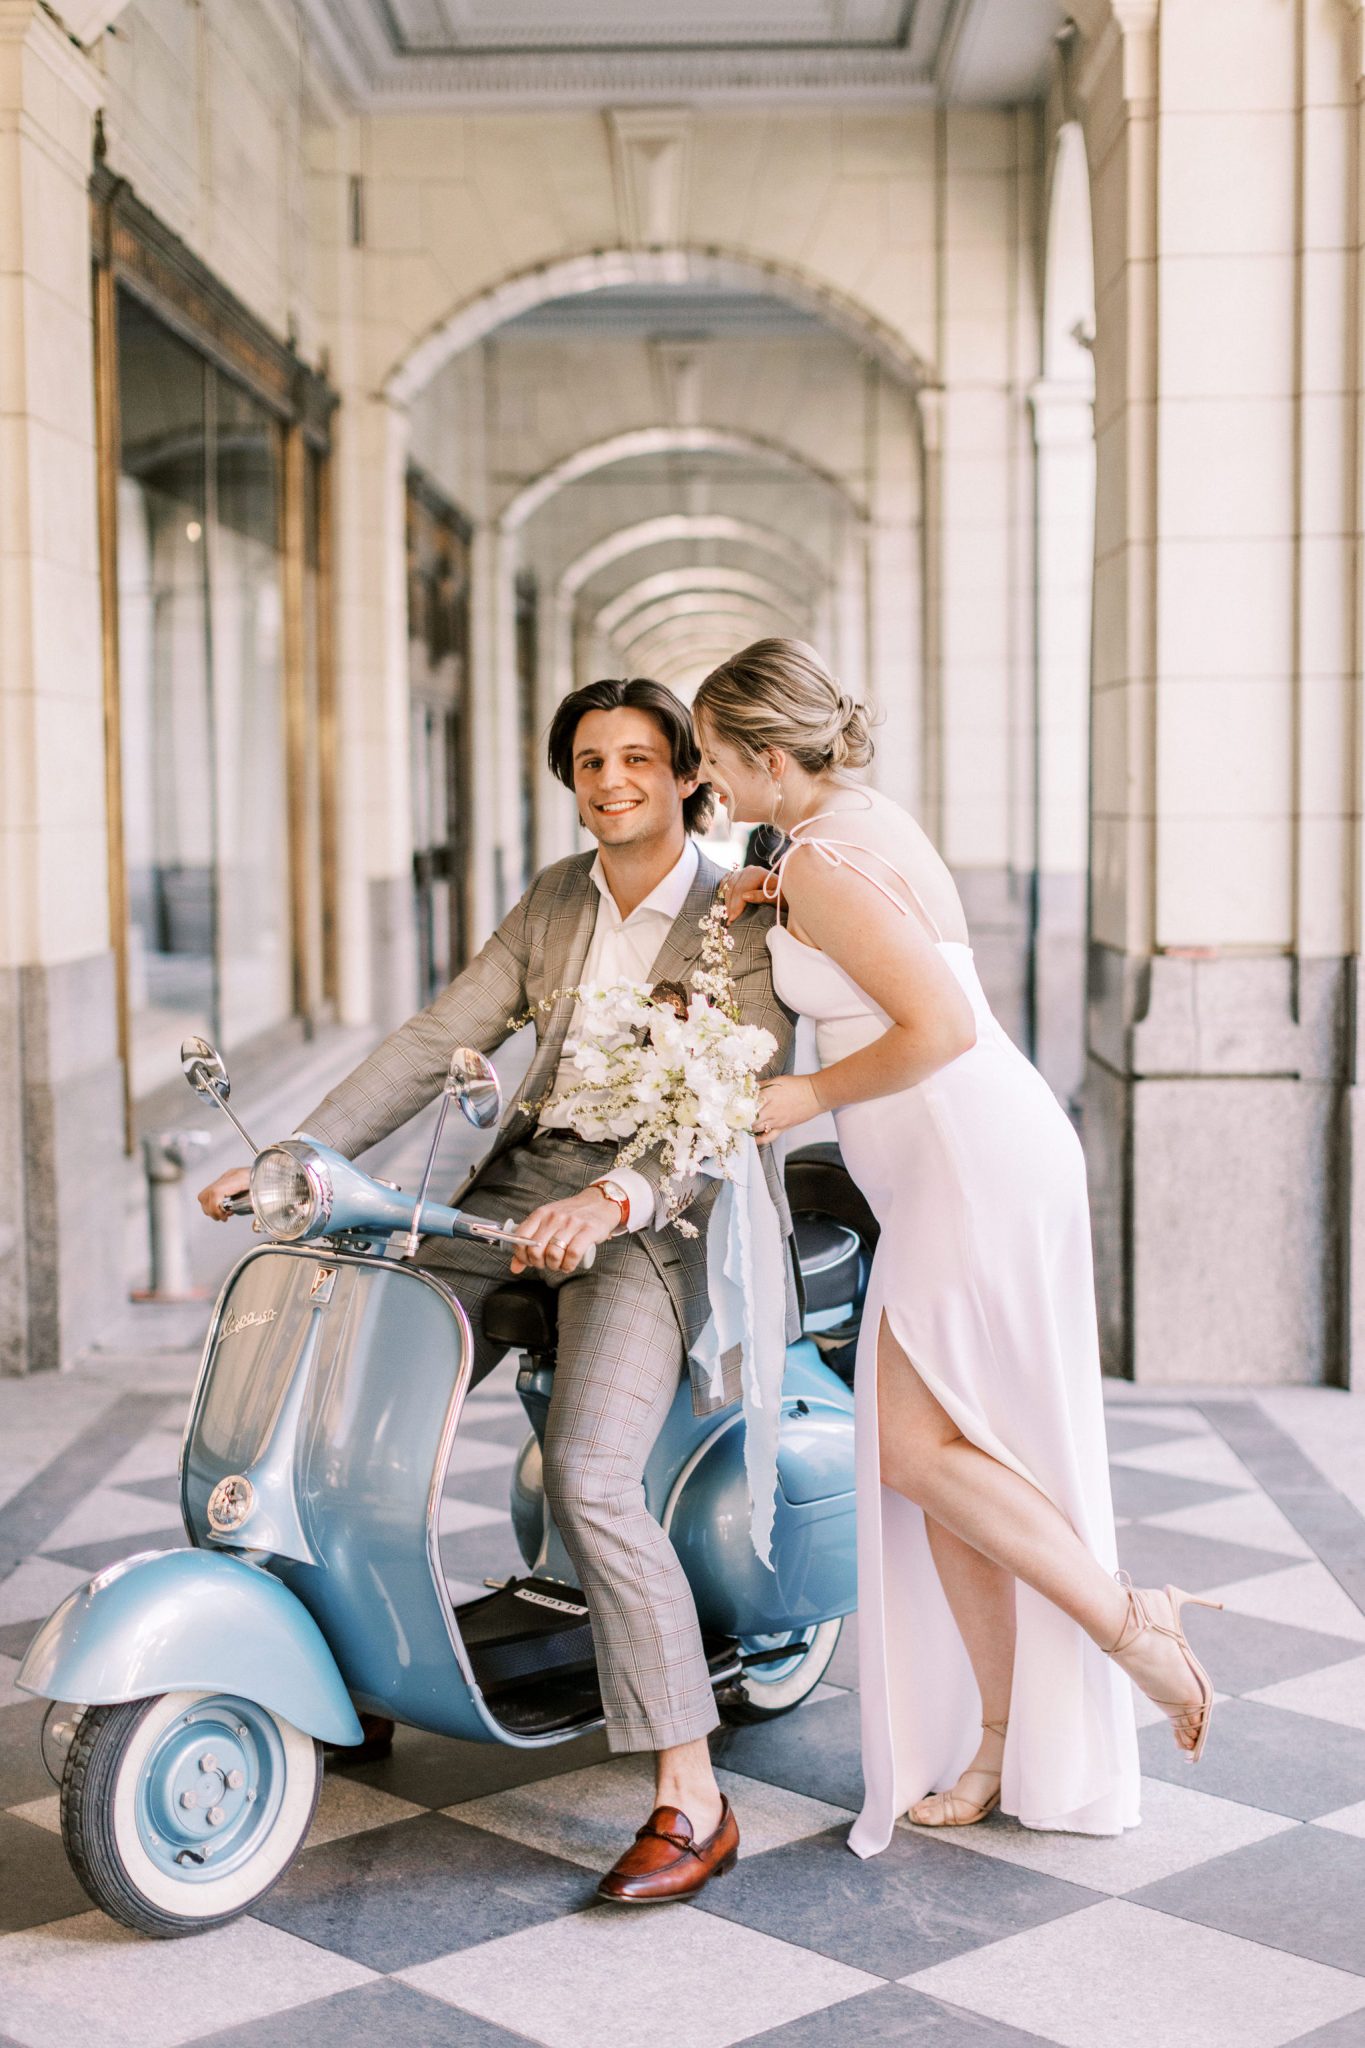 Modern bride in a white slip dress and groom in a grey suit pose with a blue vespa for this downtown elopement